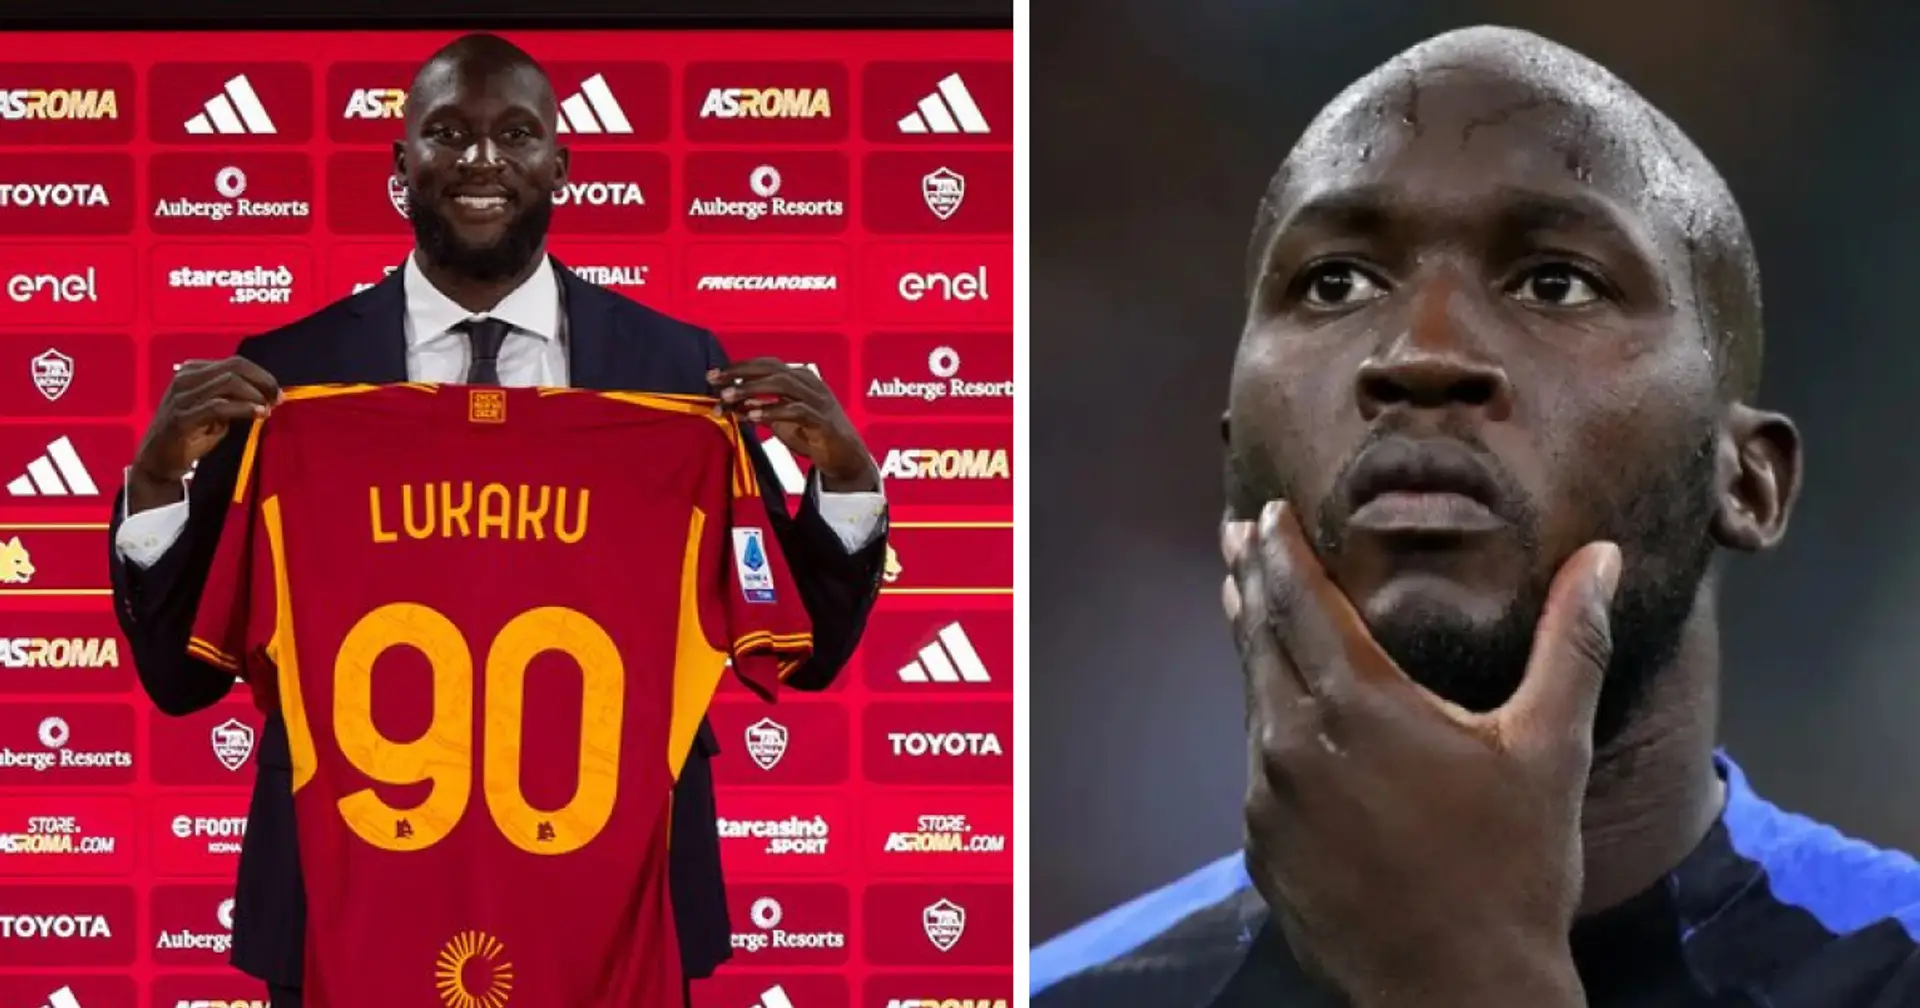 'Happy to see him join his boyhood club': Global fans react to Lukaku joining AS Roma